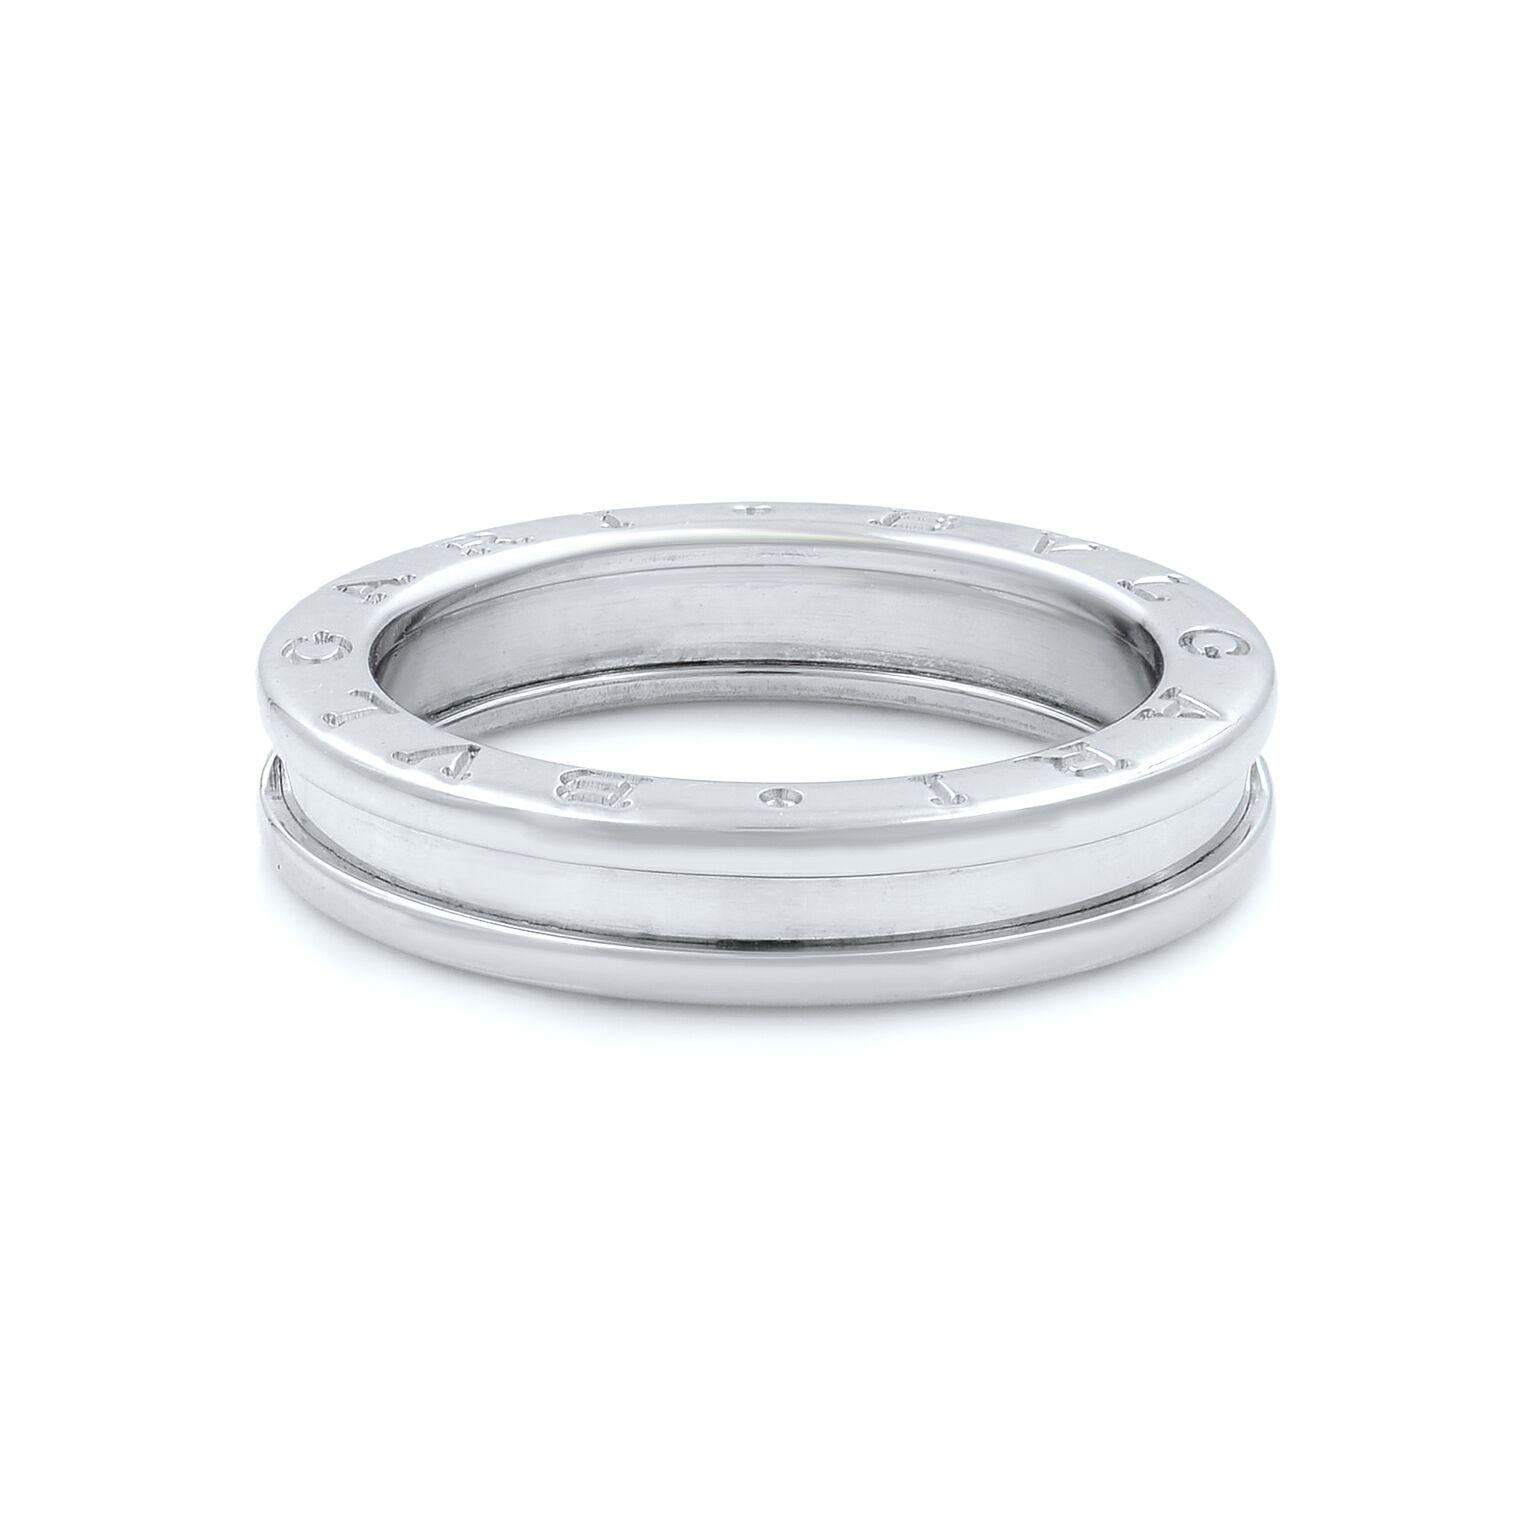 Bvlgari B.Zero 1 Band Ring. Crafted from 18k white gold with a polished finish.
Material: 18k white gold.
Hallmark: Bvlgari 750 Made in Italy 58.
Width: 4.81mm
Ring Size: 8.5
Weight: 8.06 grams.